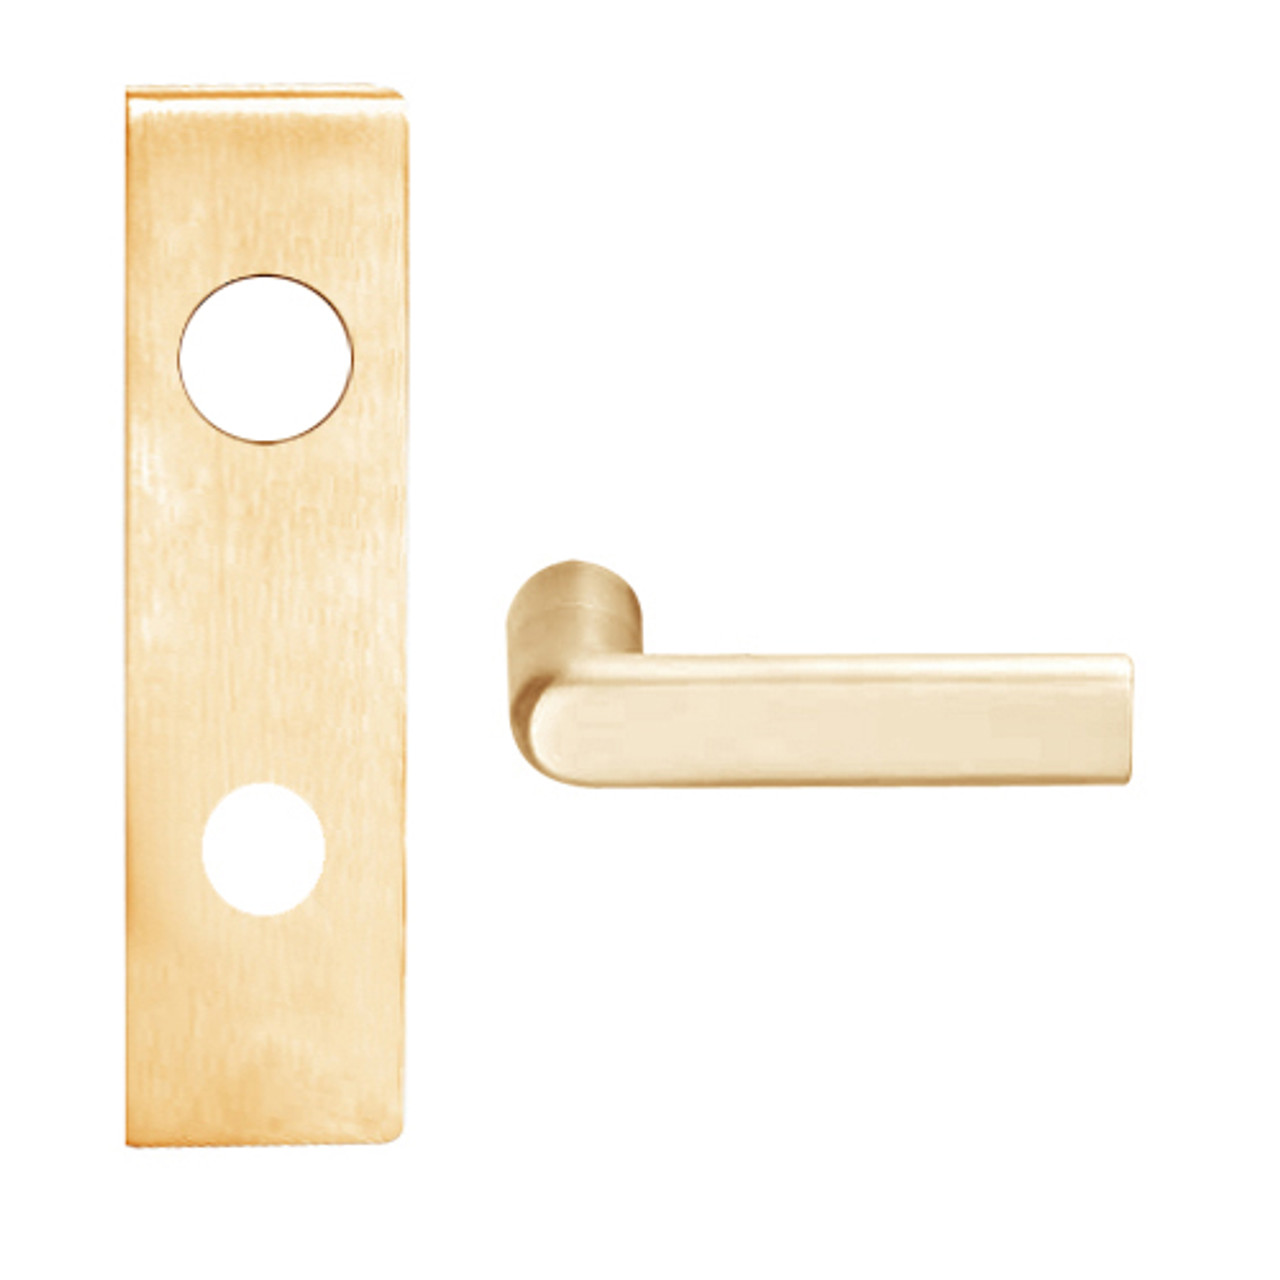 L9026J-01N-612 Schlage L Series Exit Lock with Cylinder Commercial Mortise Lock with 01 Cast Lever Design Prepped for FSIC in Satin Bronze